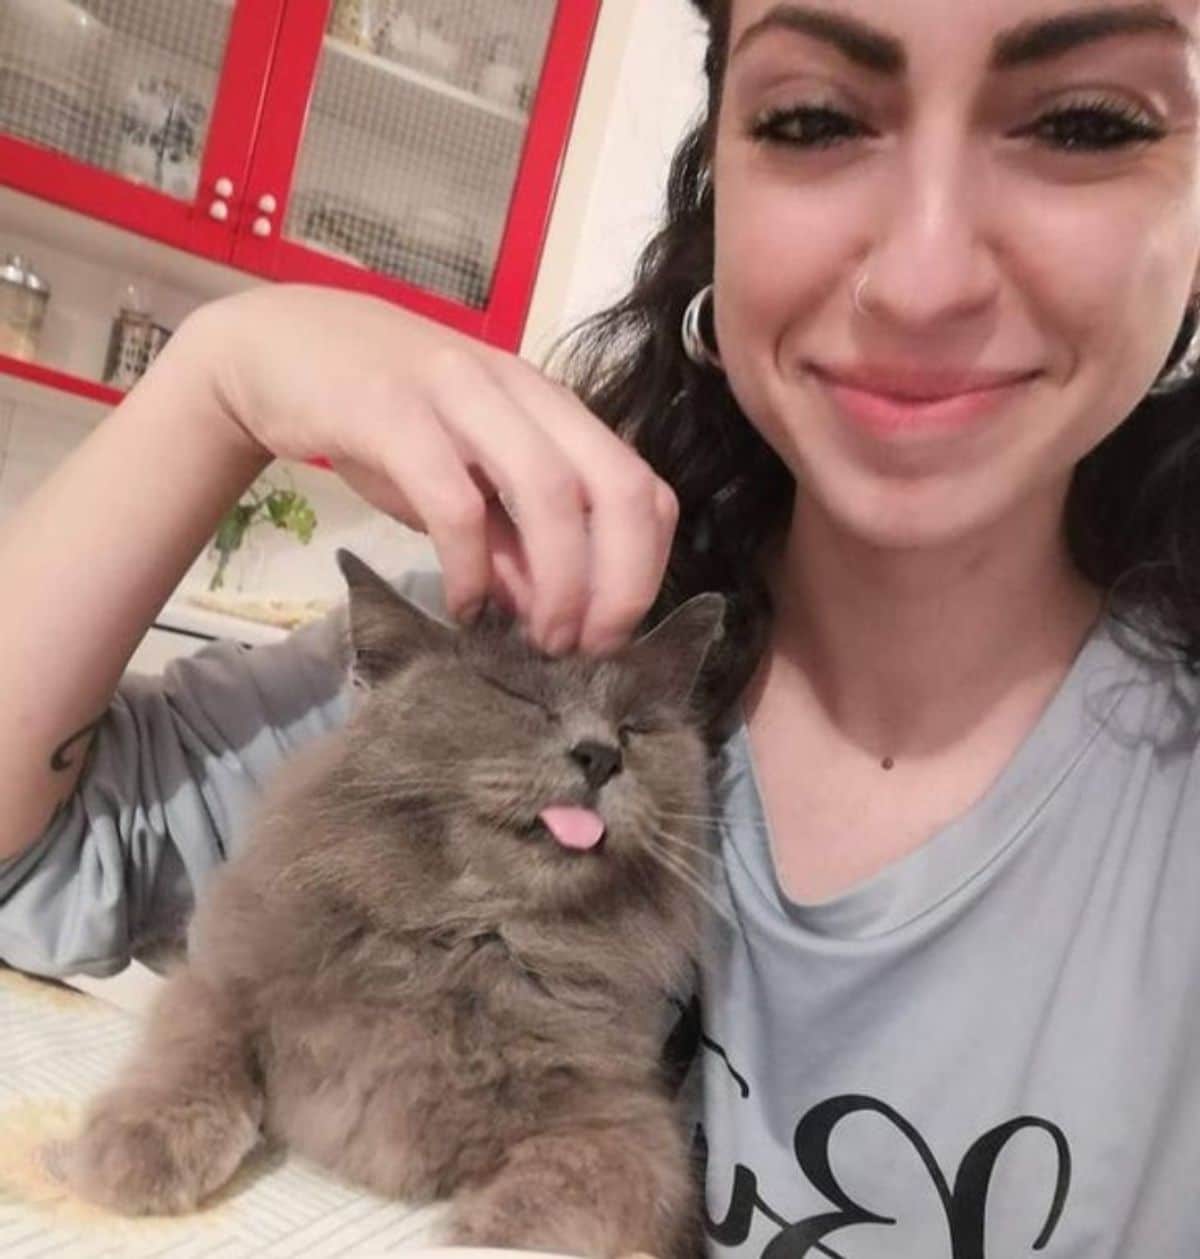 grey fluffy cat getting head scratches from a woman and the cat's tongue is sticking out